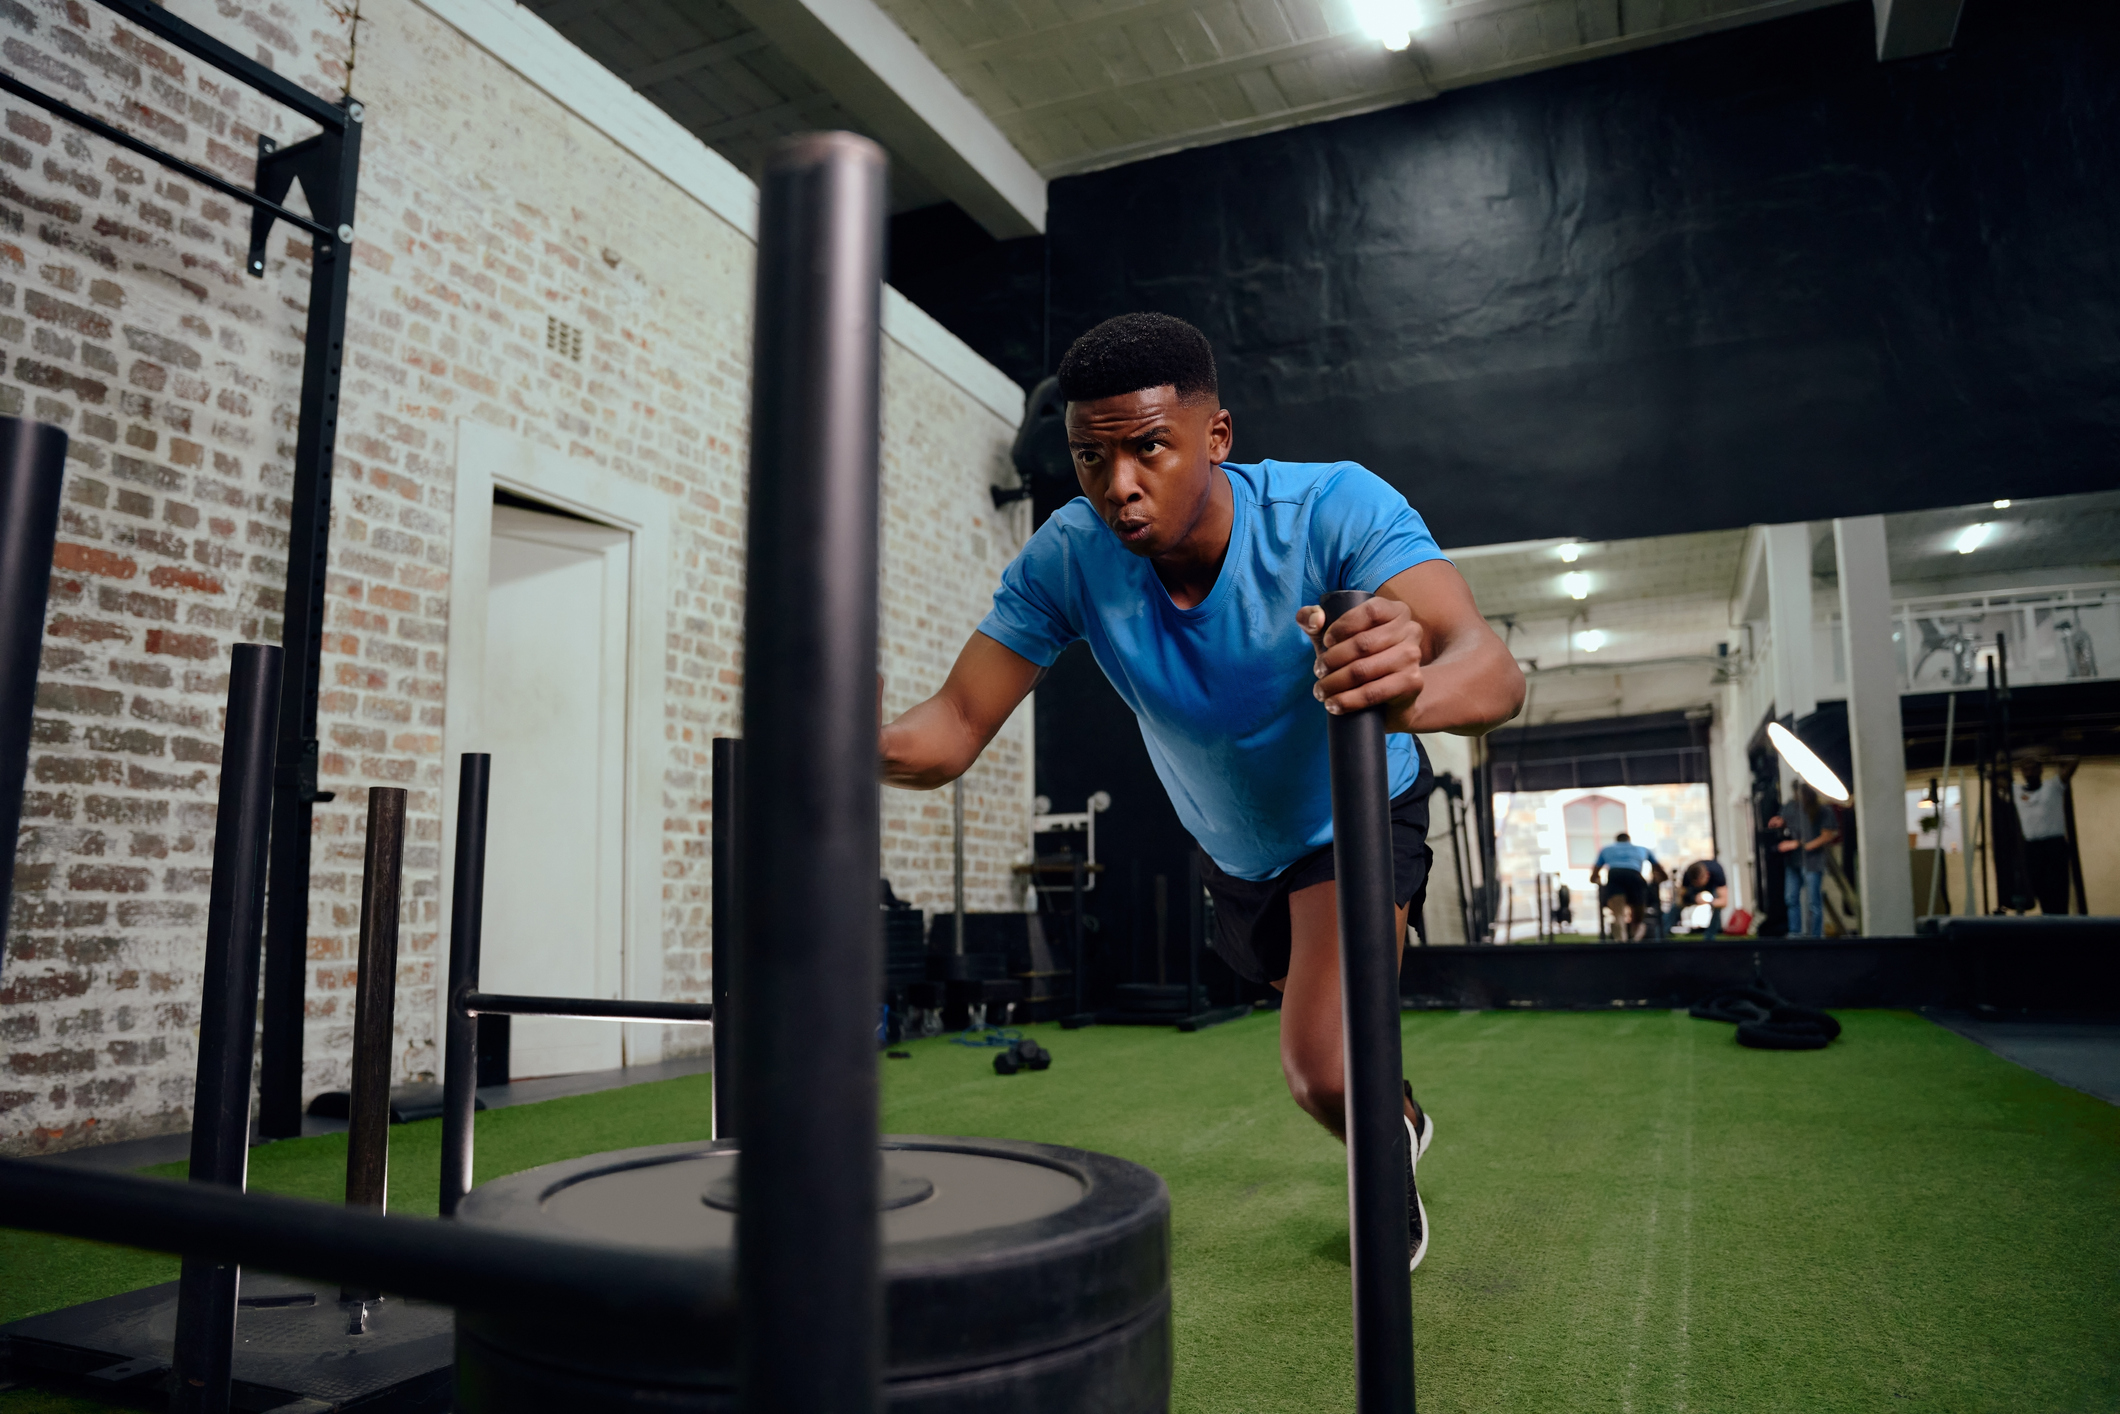 A young black man performs a sled push exercise in a gym.